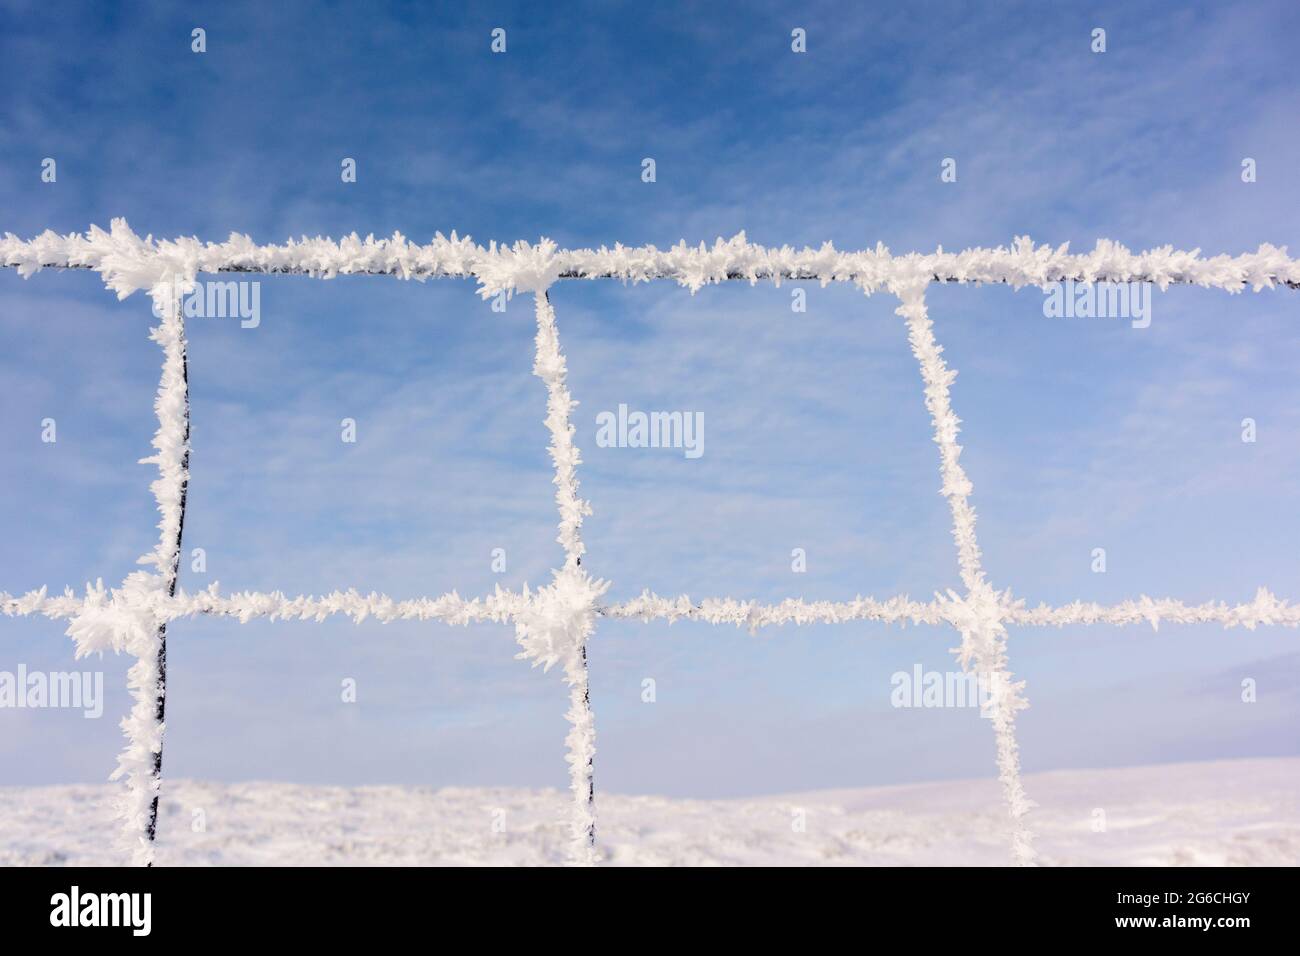 Hoar frost forming on wire fence during a cold winter spell in the Yorkshire Dales, UK. Stock Photo